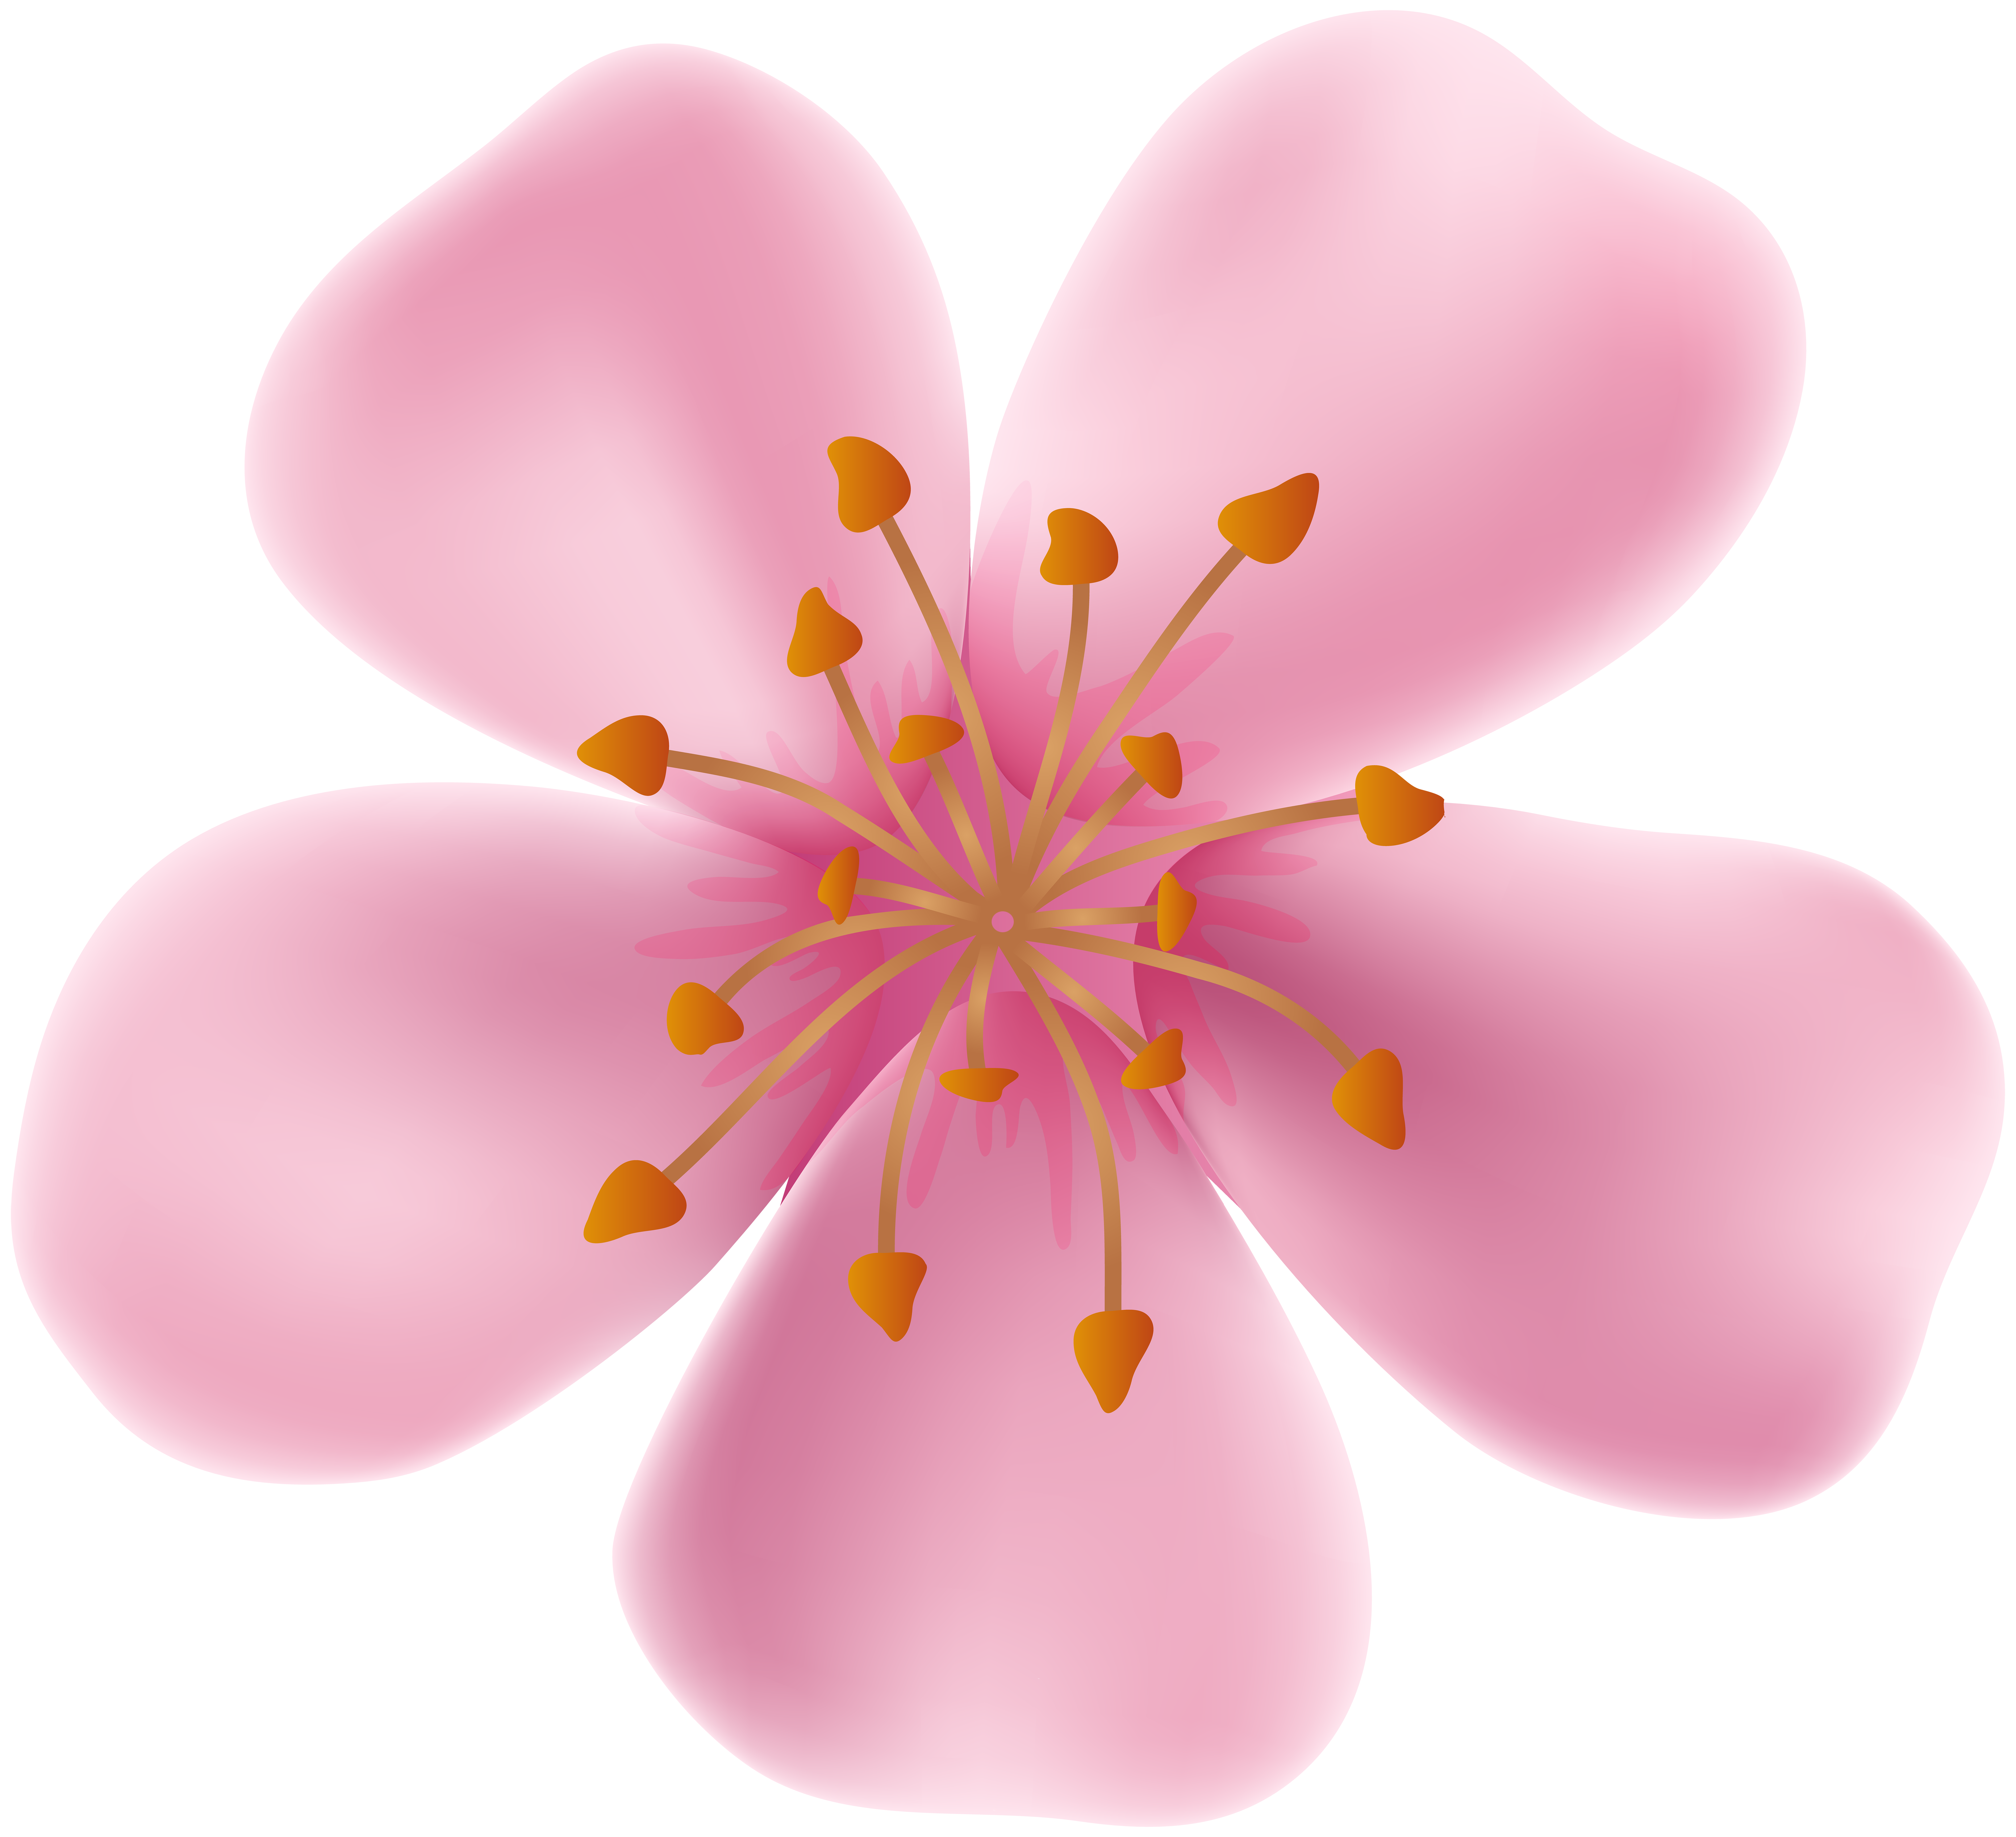 Spring Blooming Flower Clip Art Image | Gallery Yopriceville - High ...